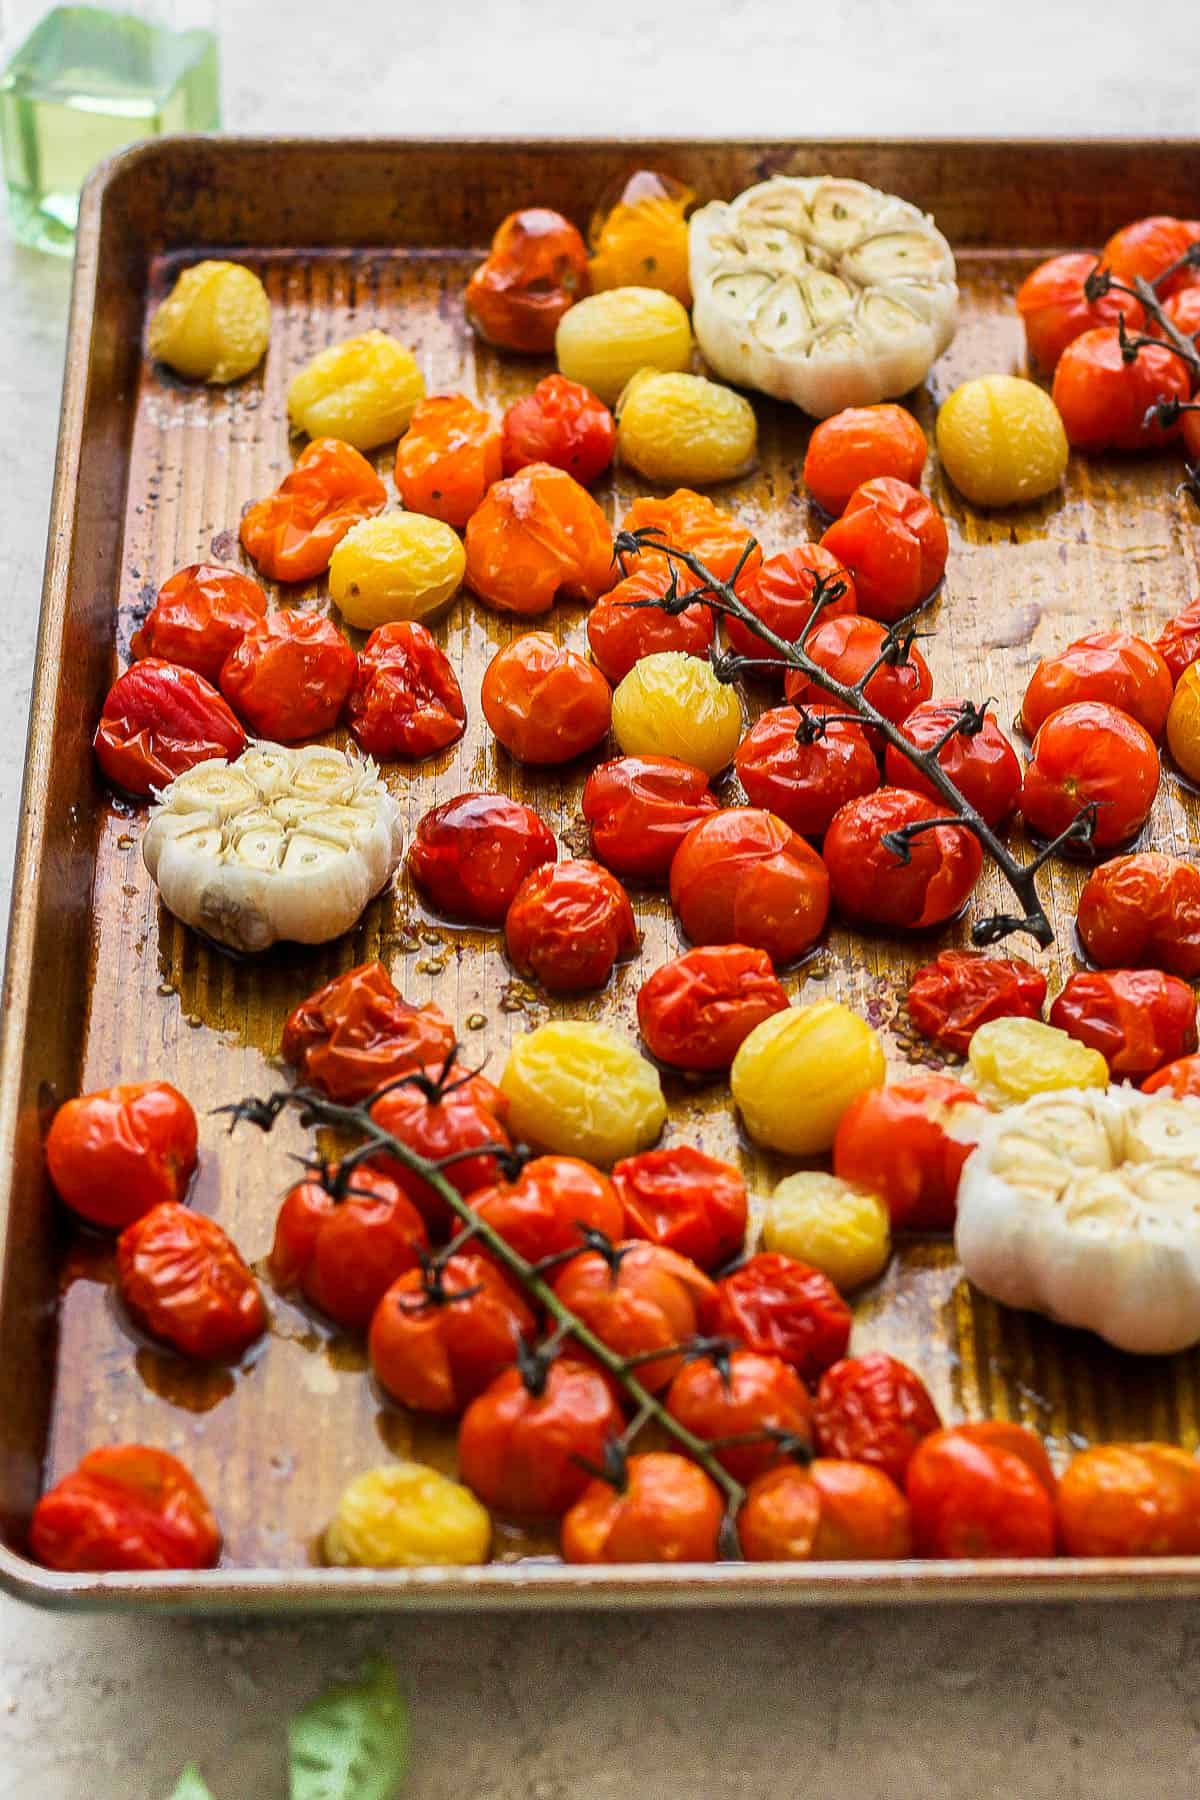 Roasted garlic cloves and cherry tomatoes on a baking sheet.